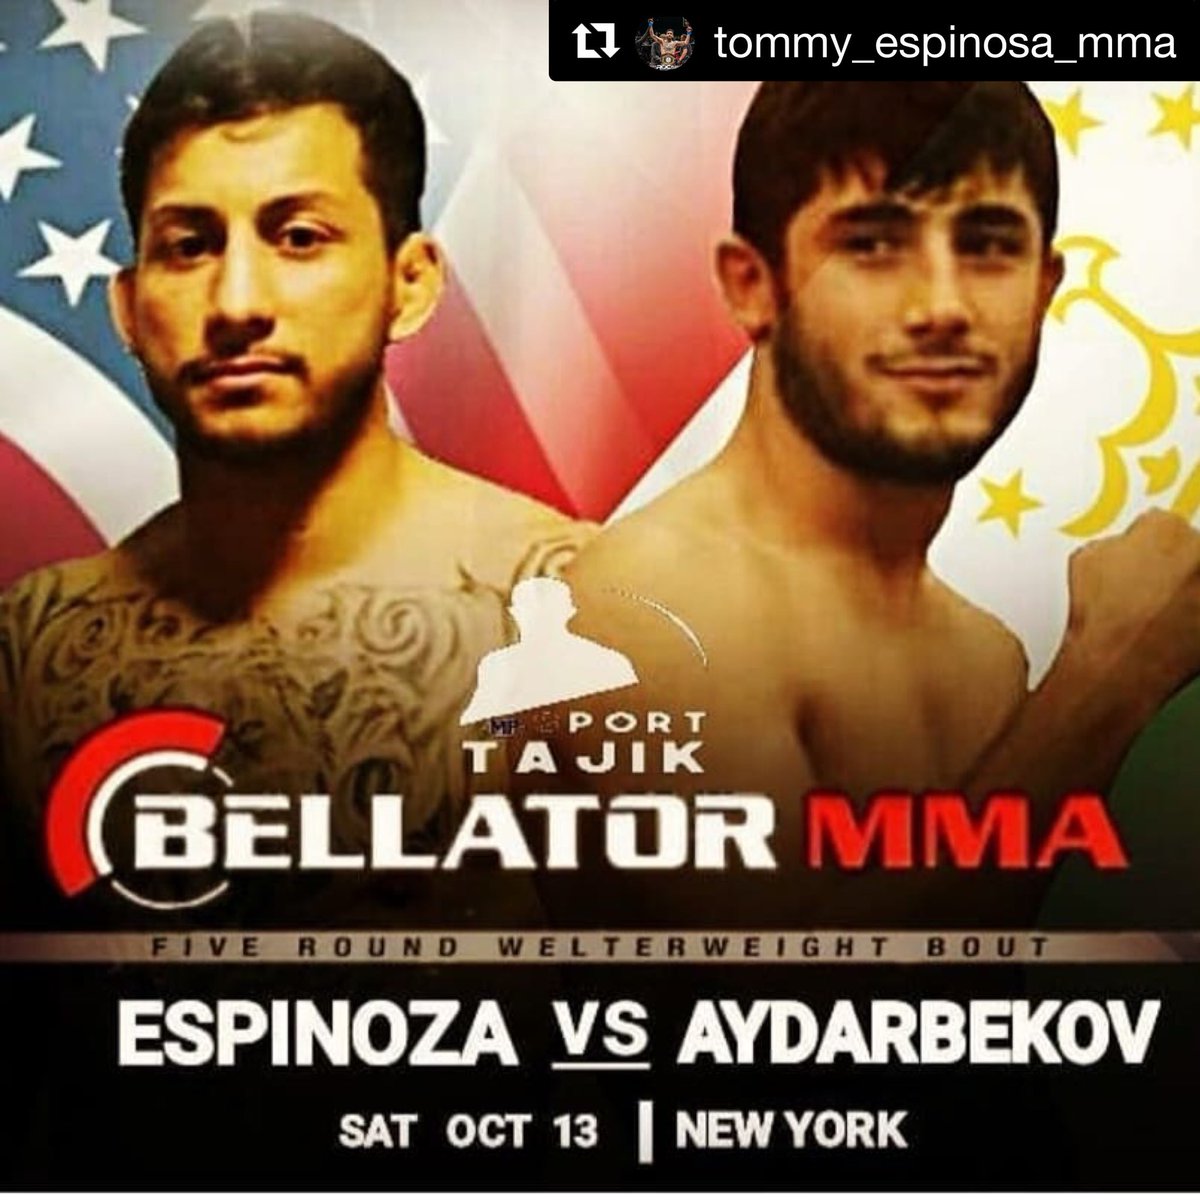 #Repost @tommy_espinosa_mma with @get_repost
・・・
Found this  here on instagram really digging it! #fitnessmotivation
#mma #ufc #boxing #kickboxing #fight #muaythai #bjj #fitness #rizin #bellator #knockout #training #fighter #karate #amiraliakbari #conormcgregor #box